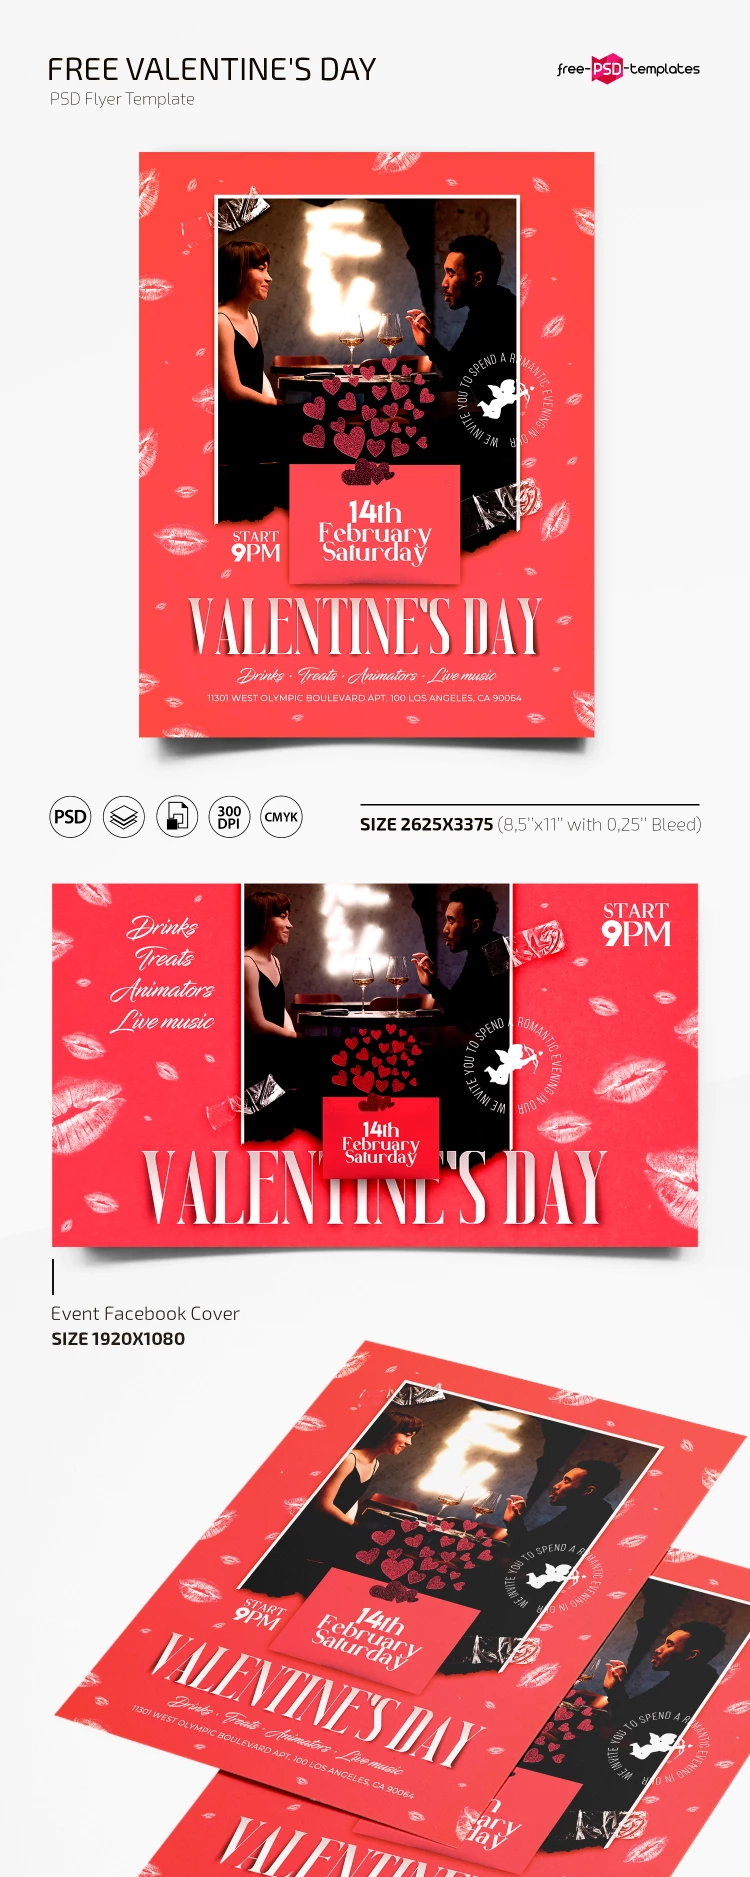 Free Valentine’s Day Flyer PSD Template